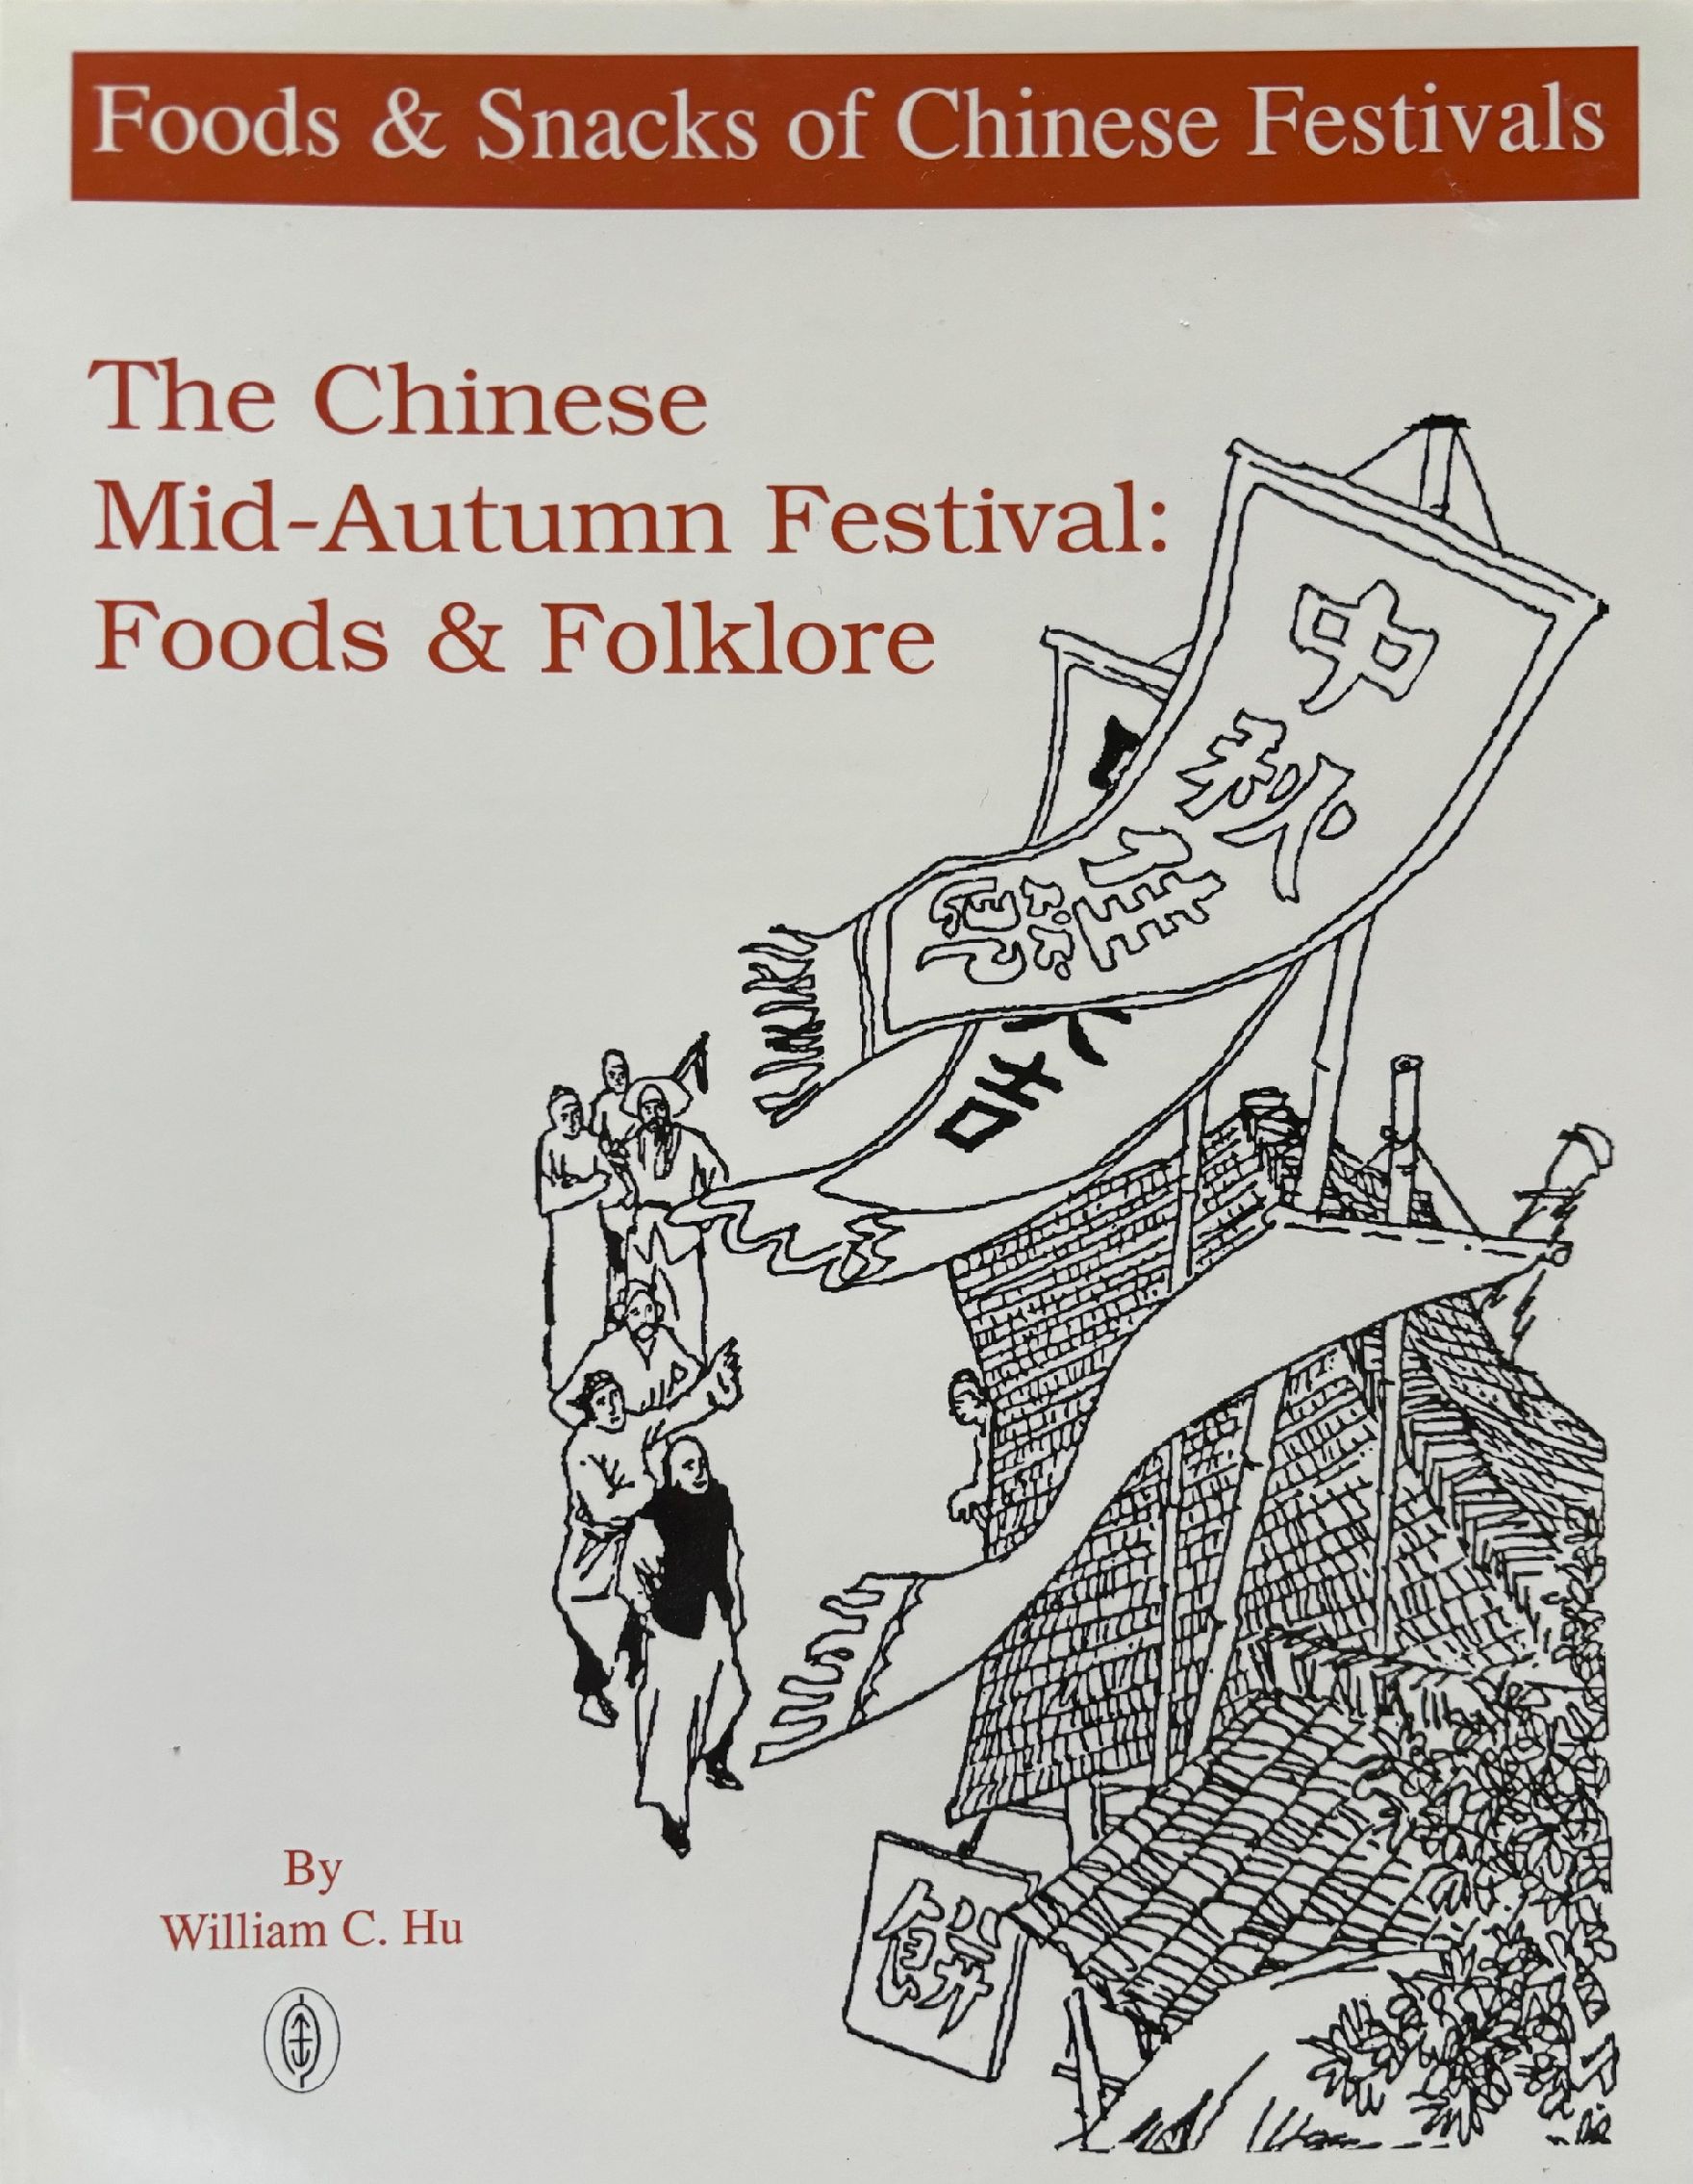 (*NEW ARRIVAL*) (Chinese) William Hu. The Chinese Mid-Autumn Festival: Foods and Folklore